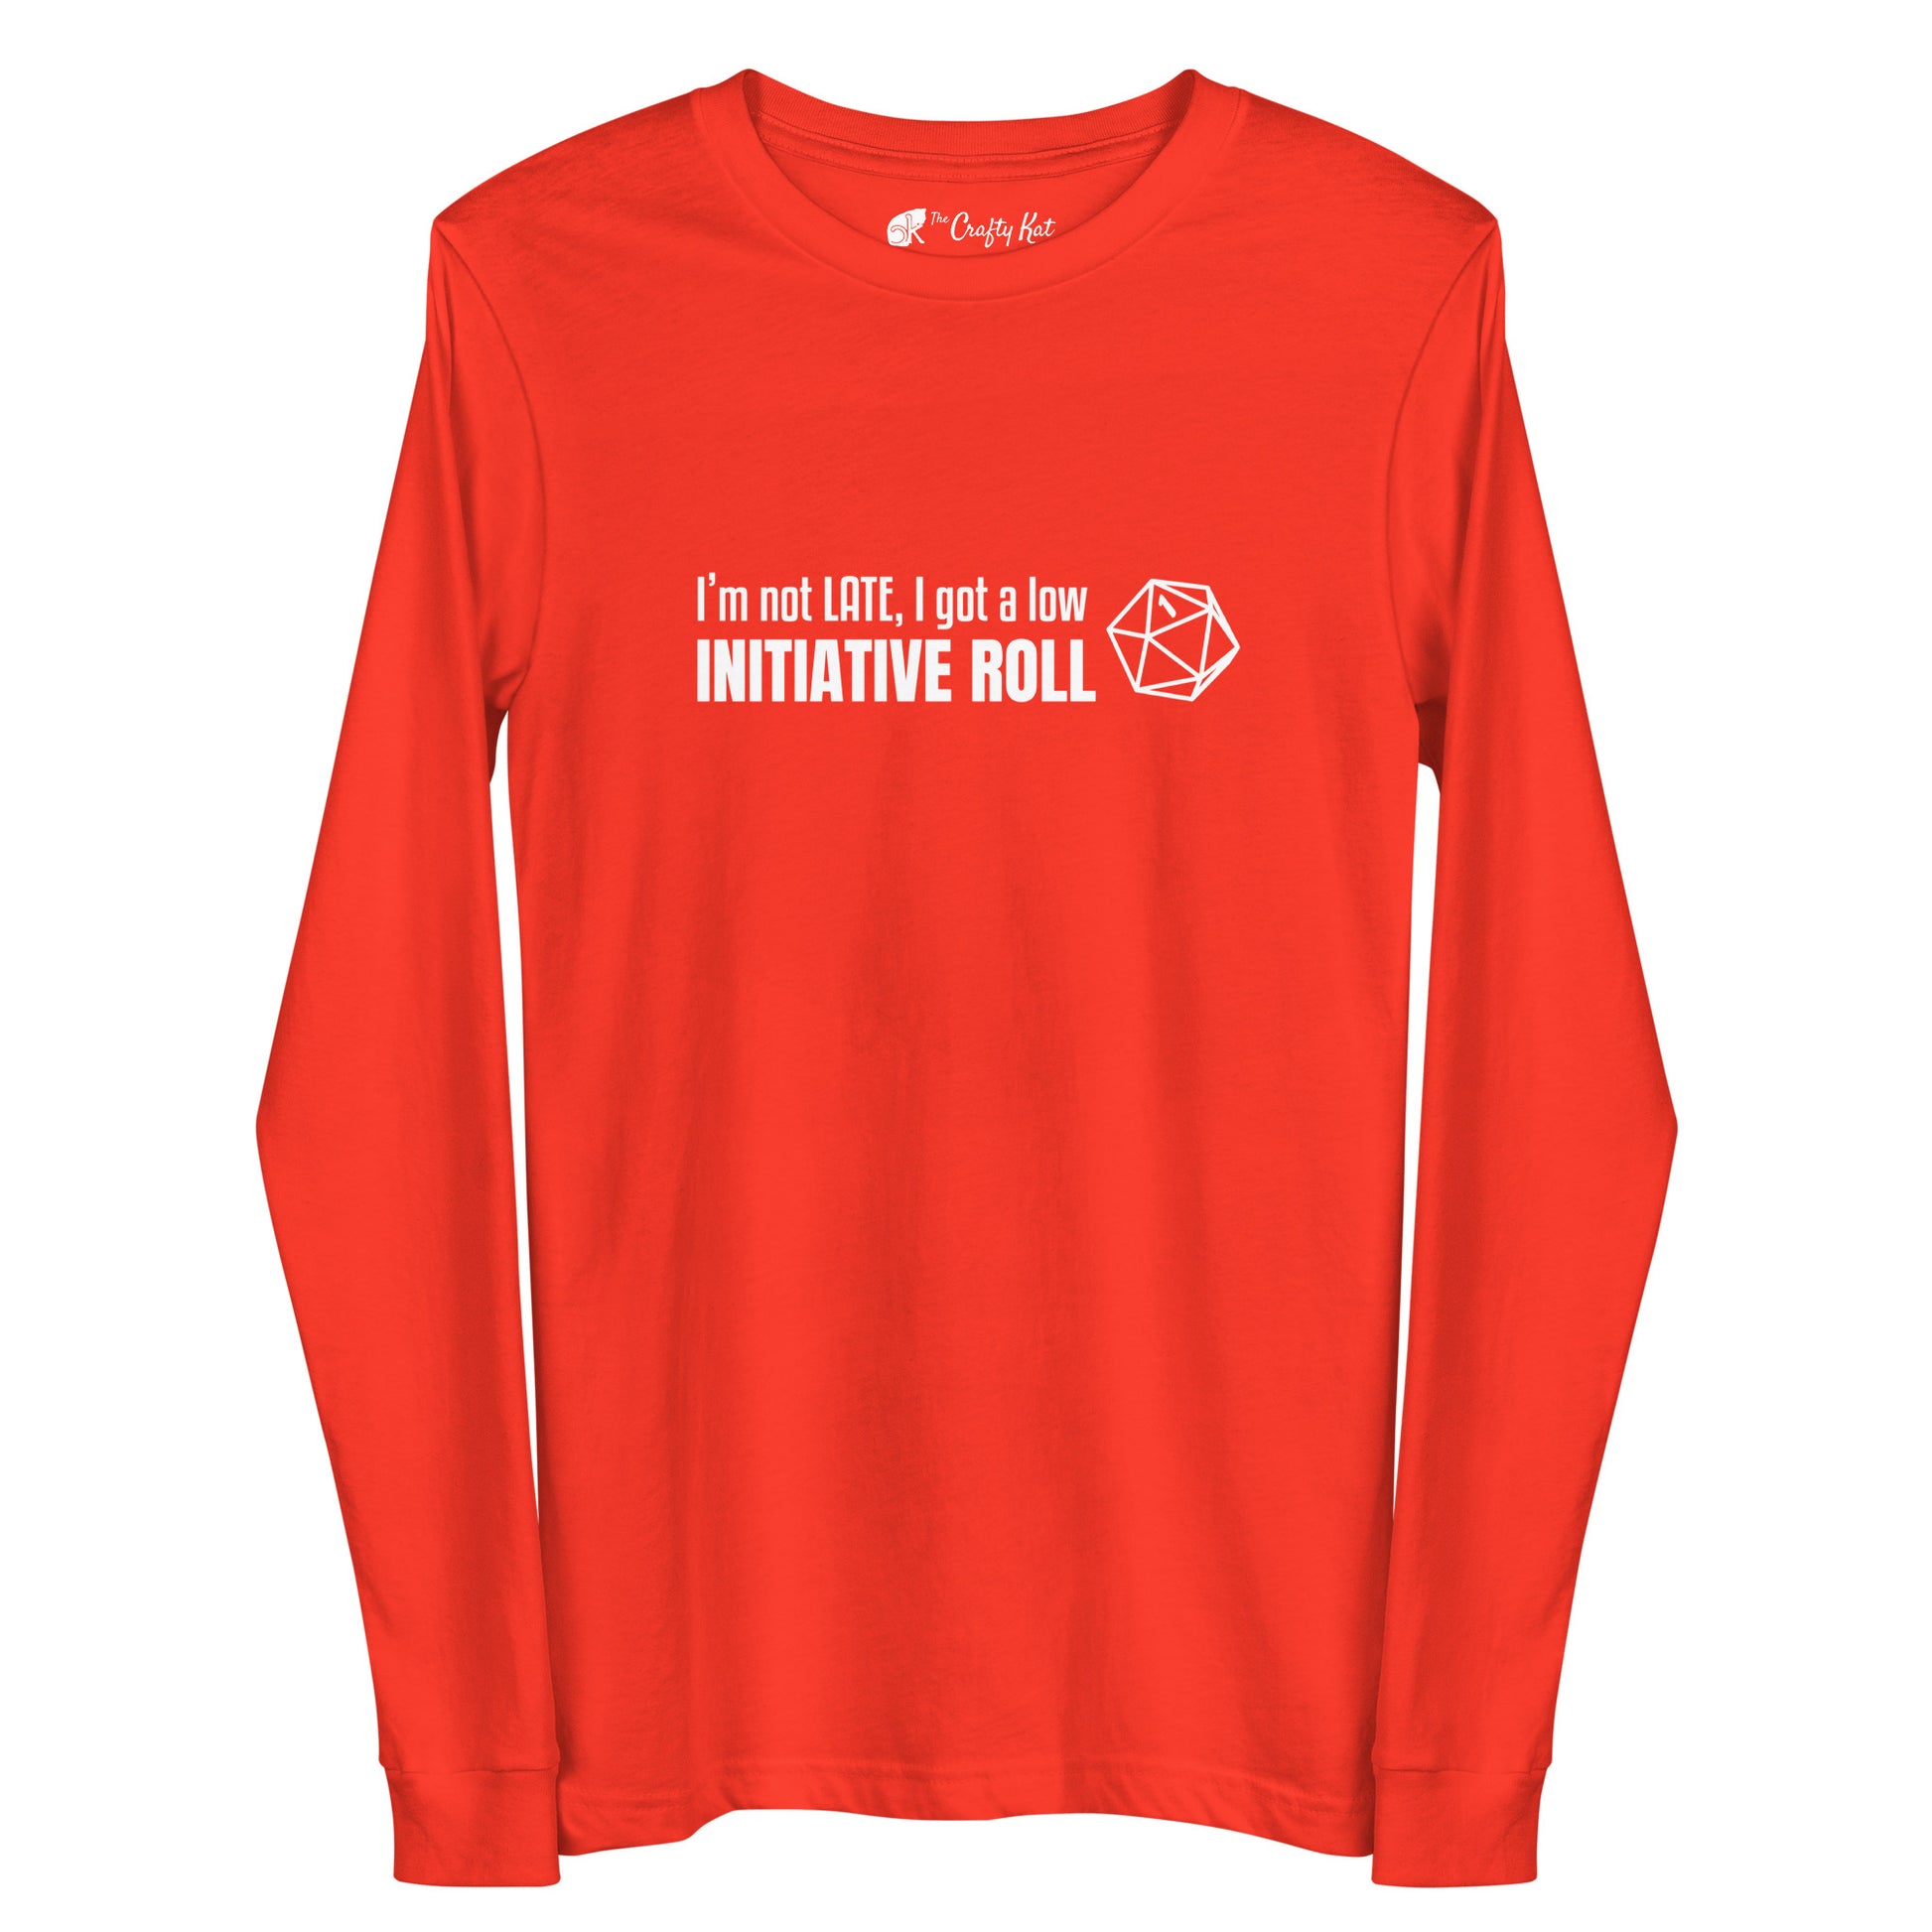 Poppy (bright red) long-sleeve tee with a graphic of a d20 (twenty-sided die) showing a roll of "1" and text: "I'm not LATE, I got a low INITIATIVE ROLL"